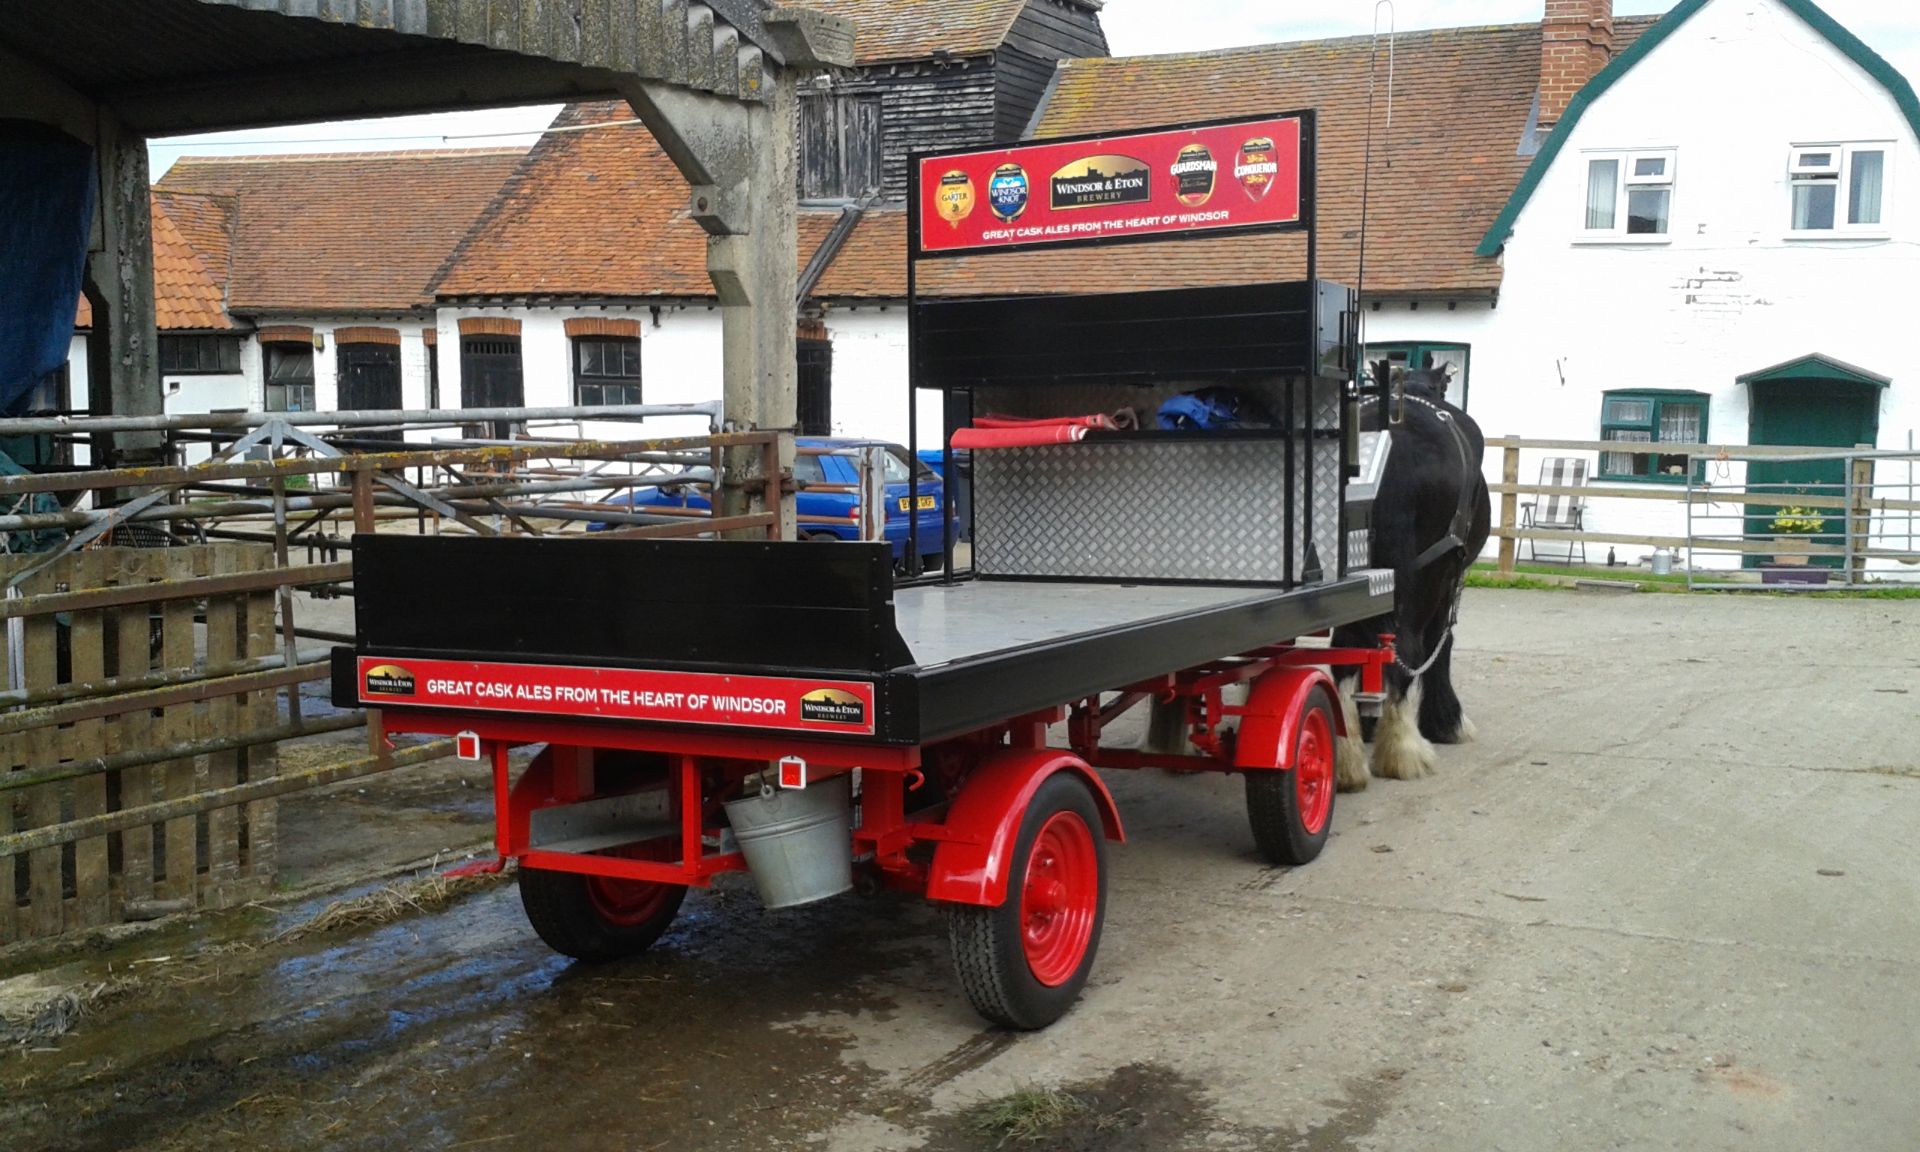 DELIVERY DRAY on rubber tyres with metal bodywork to suit a pair 15-18hh.